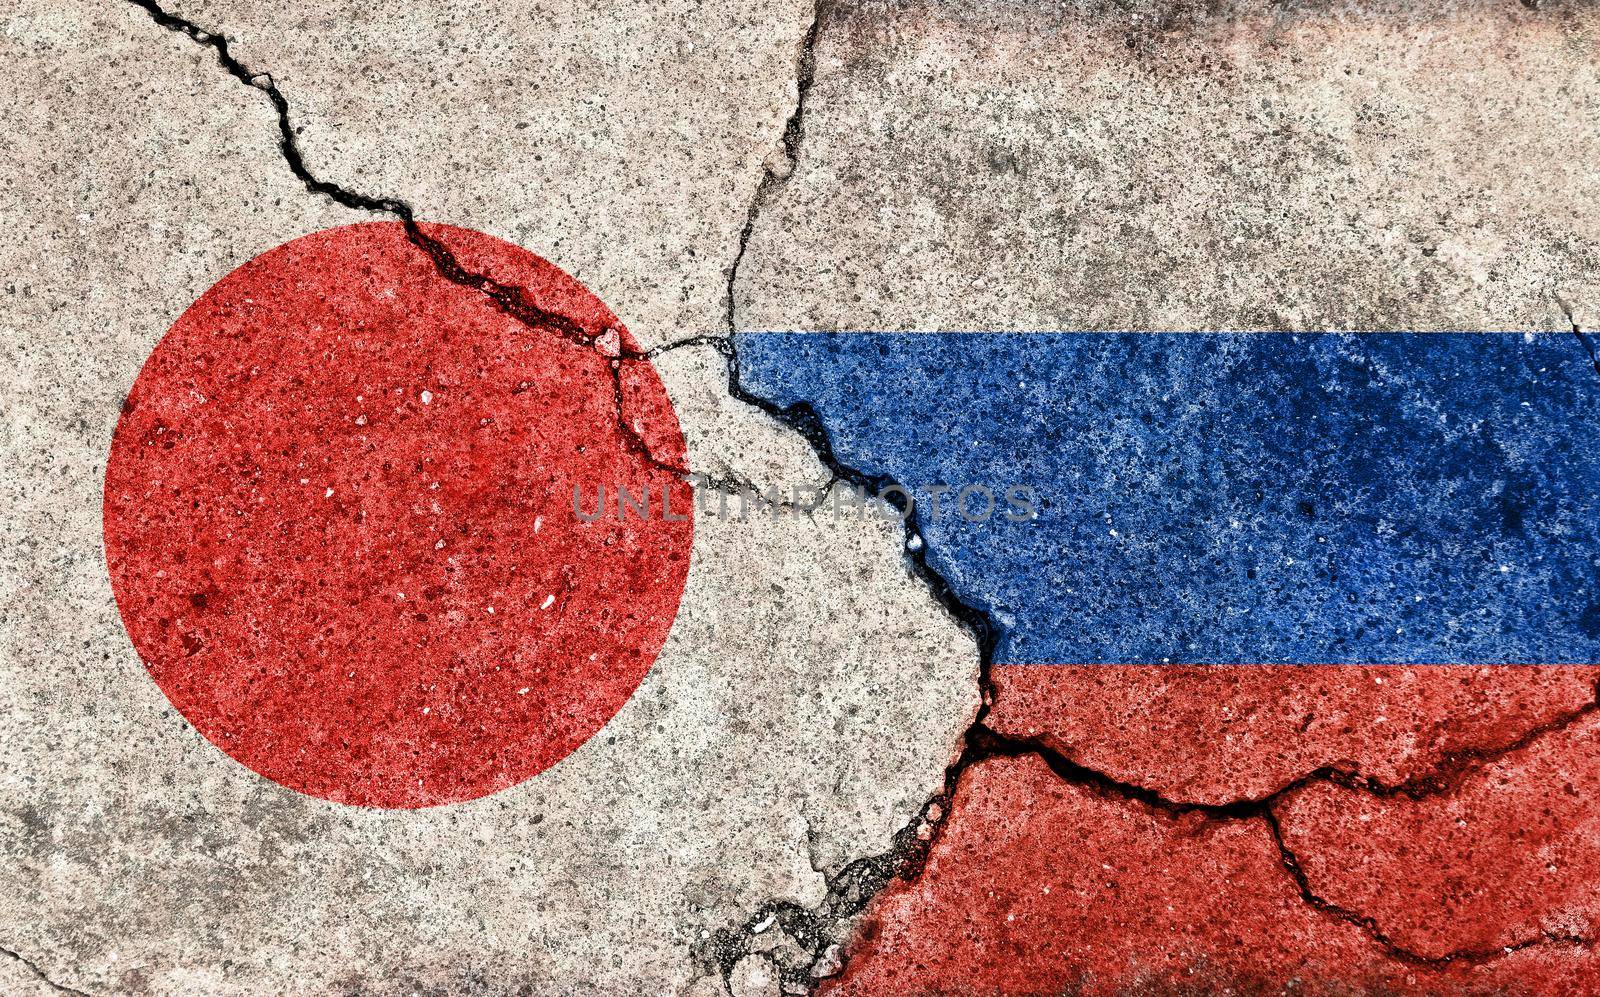 Grunge country flag illustration (cracked concrete background) / Japan vs Russia (Political or economic conflict)